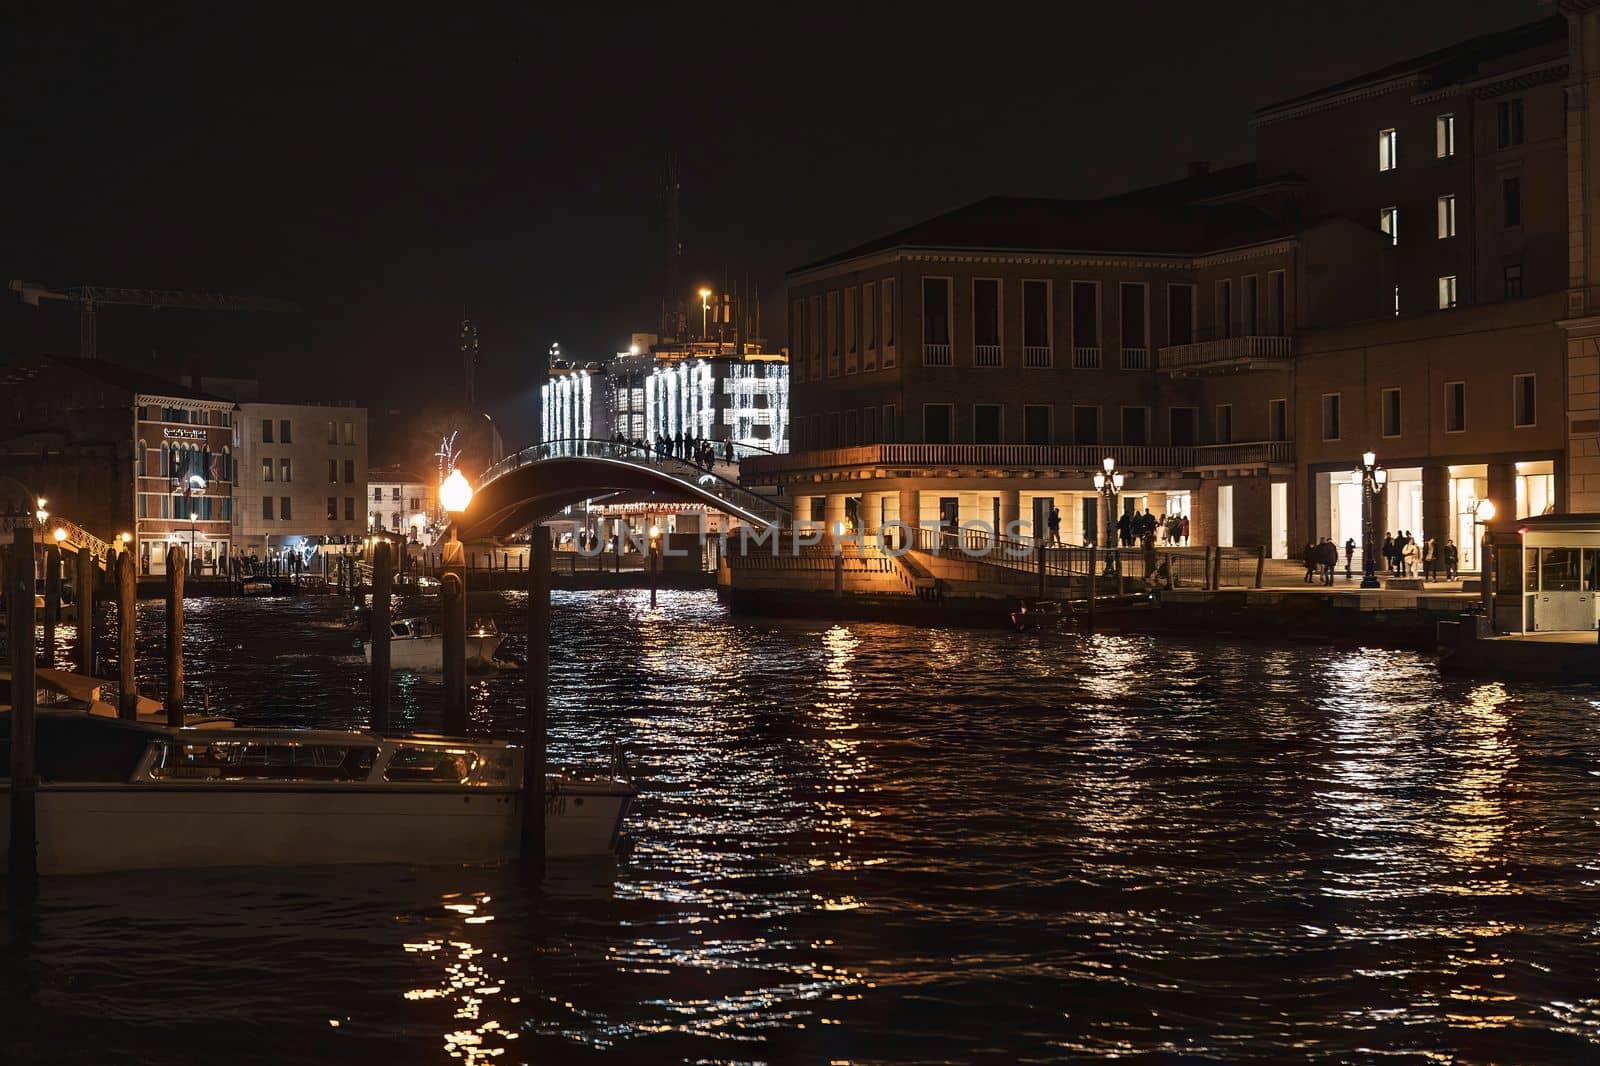 Venice landscape at dusk and night time by pippocarlot